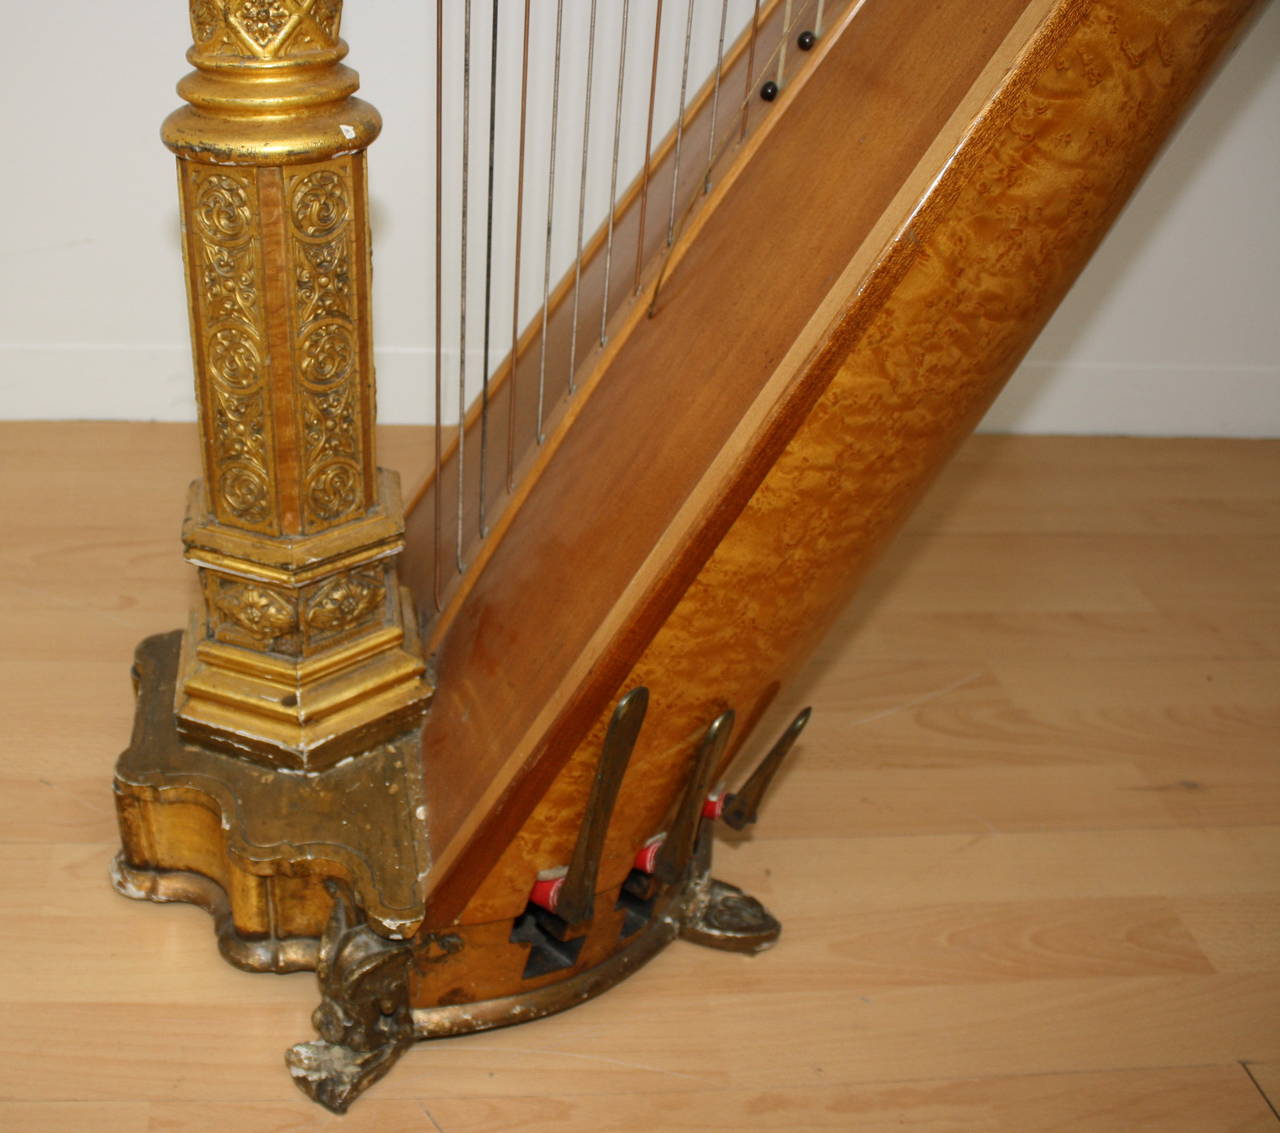 19th Century English Gothic Revival Giltwood Bird's-Eye Marble Harp For Sale 3